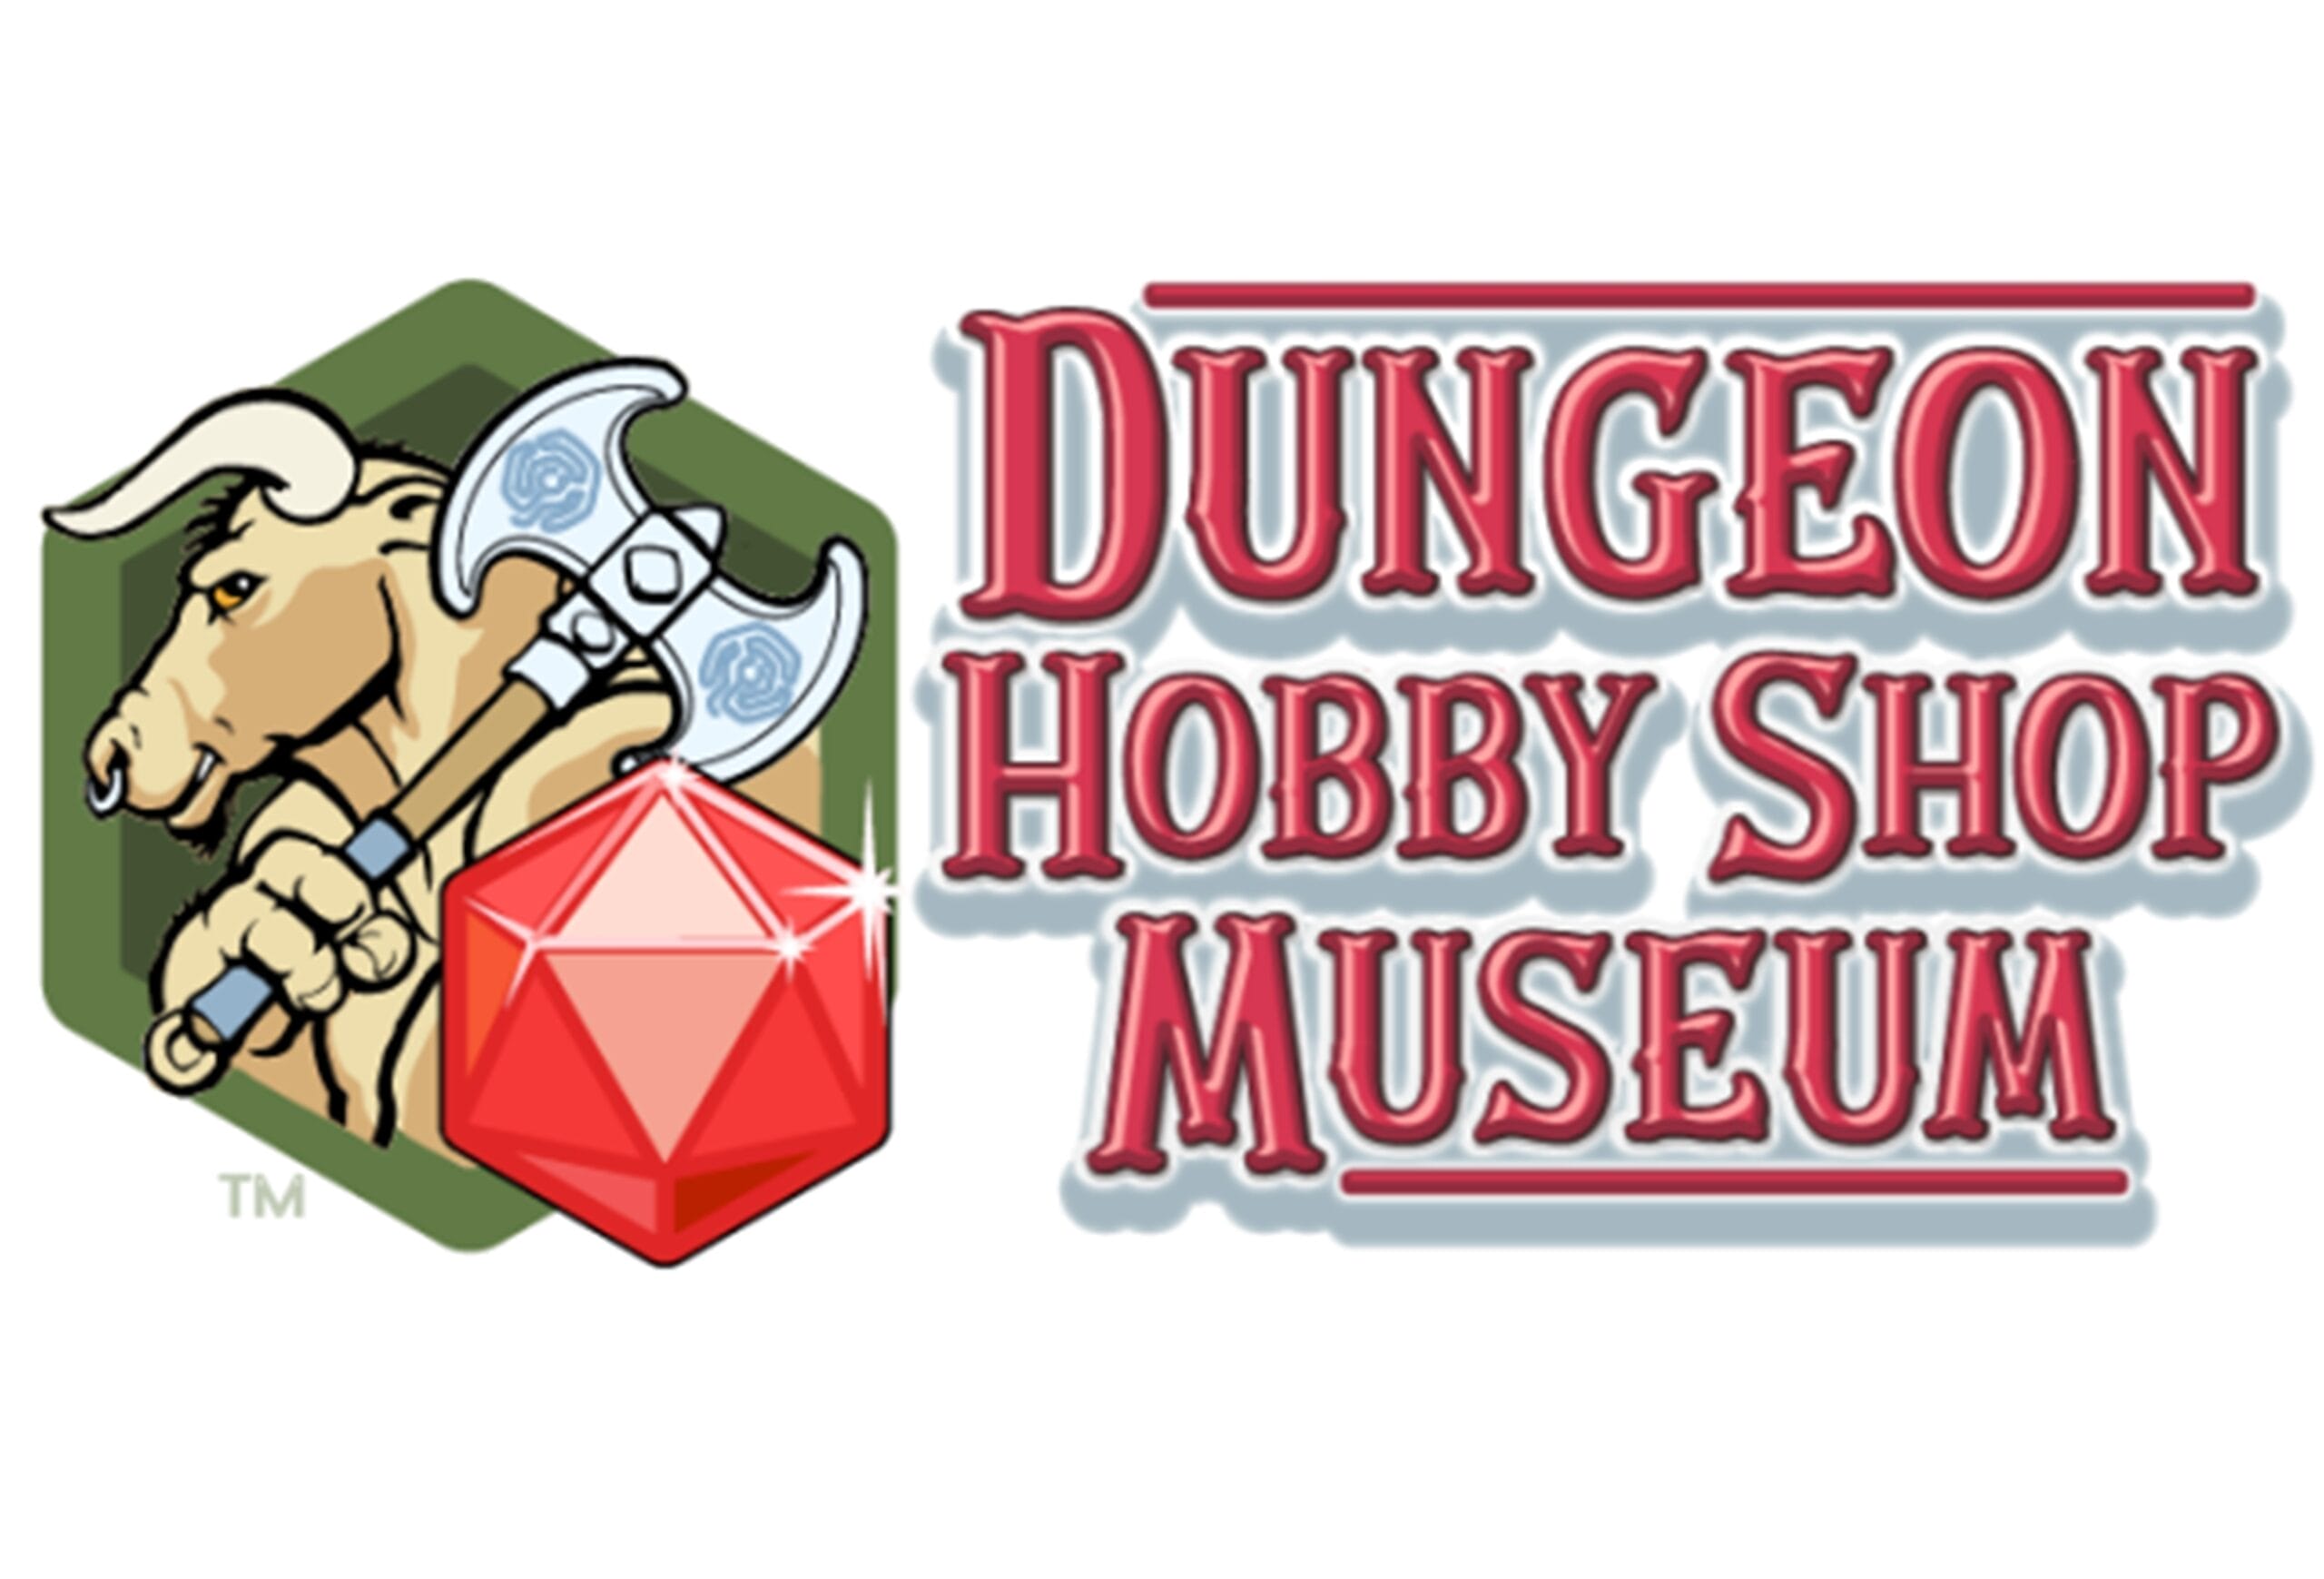 Dungeon Hobby Shop Museum